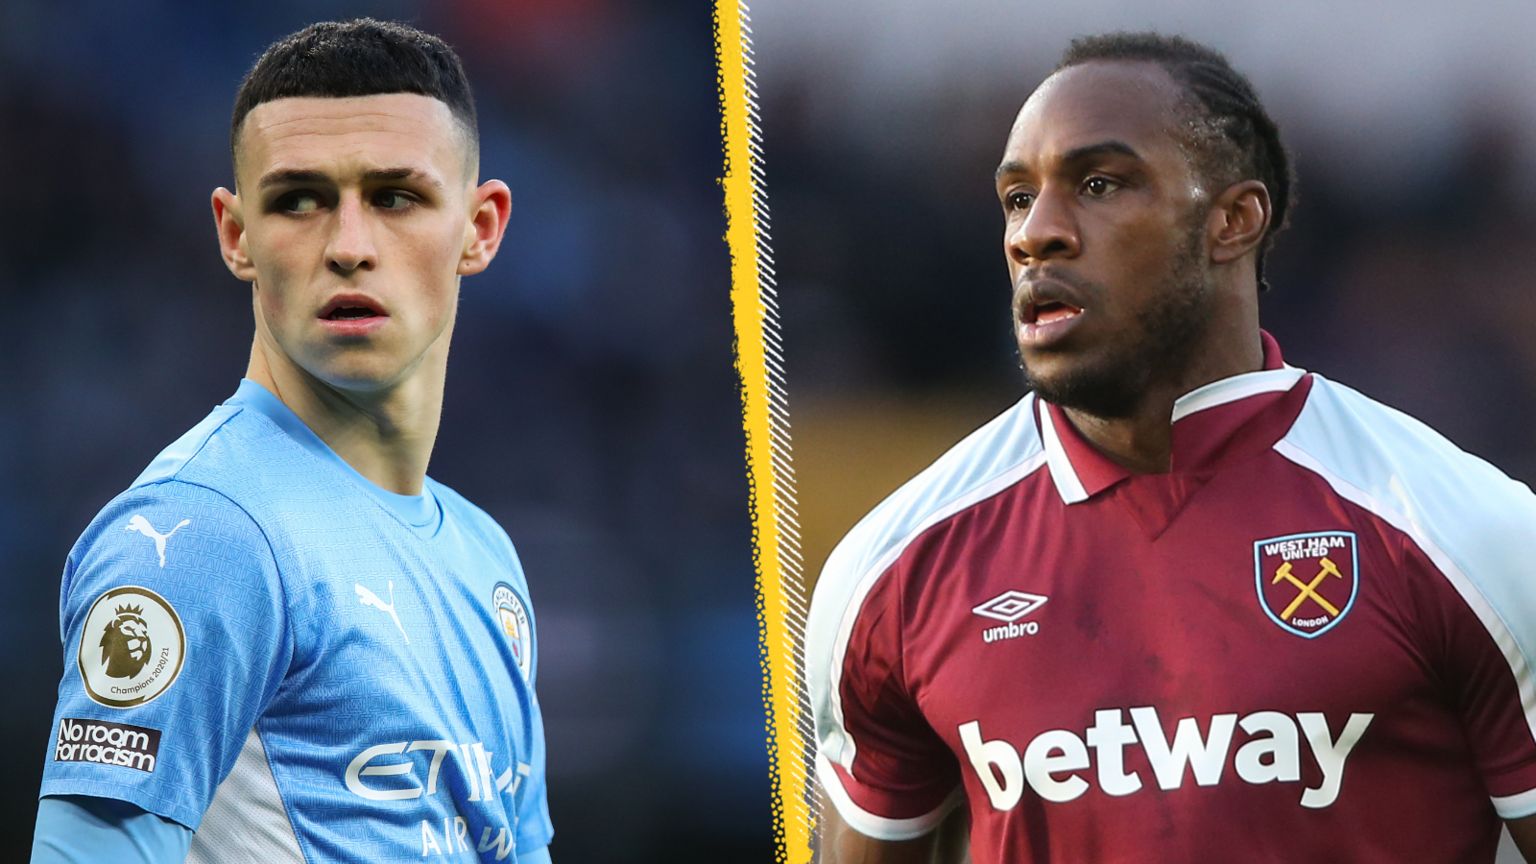 Manchester City's Phil Foden faces a fitness test ahead of the game against West Ham, who are expected to recall top scorer Michail Antonio.